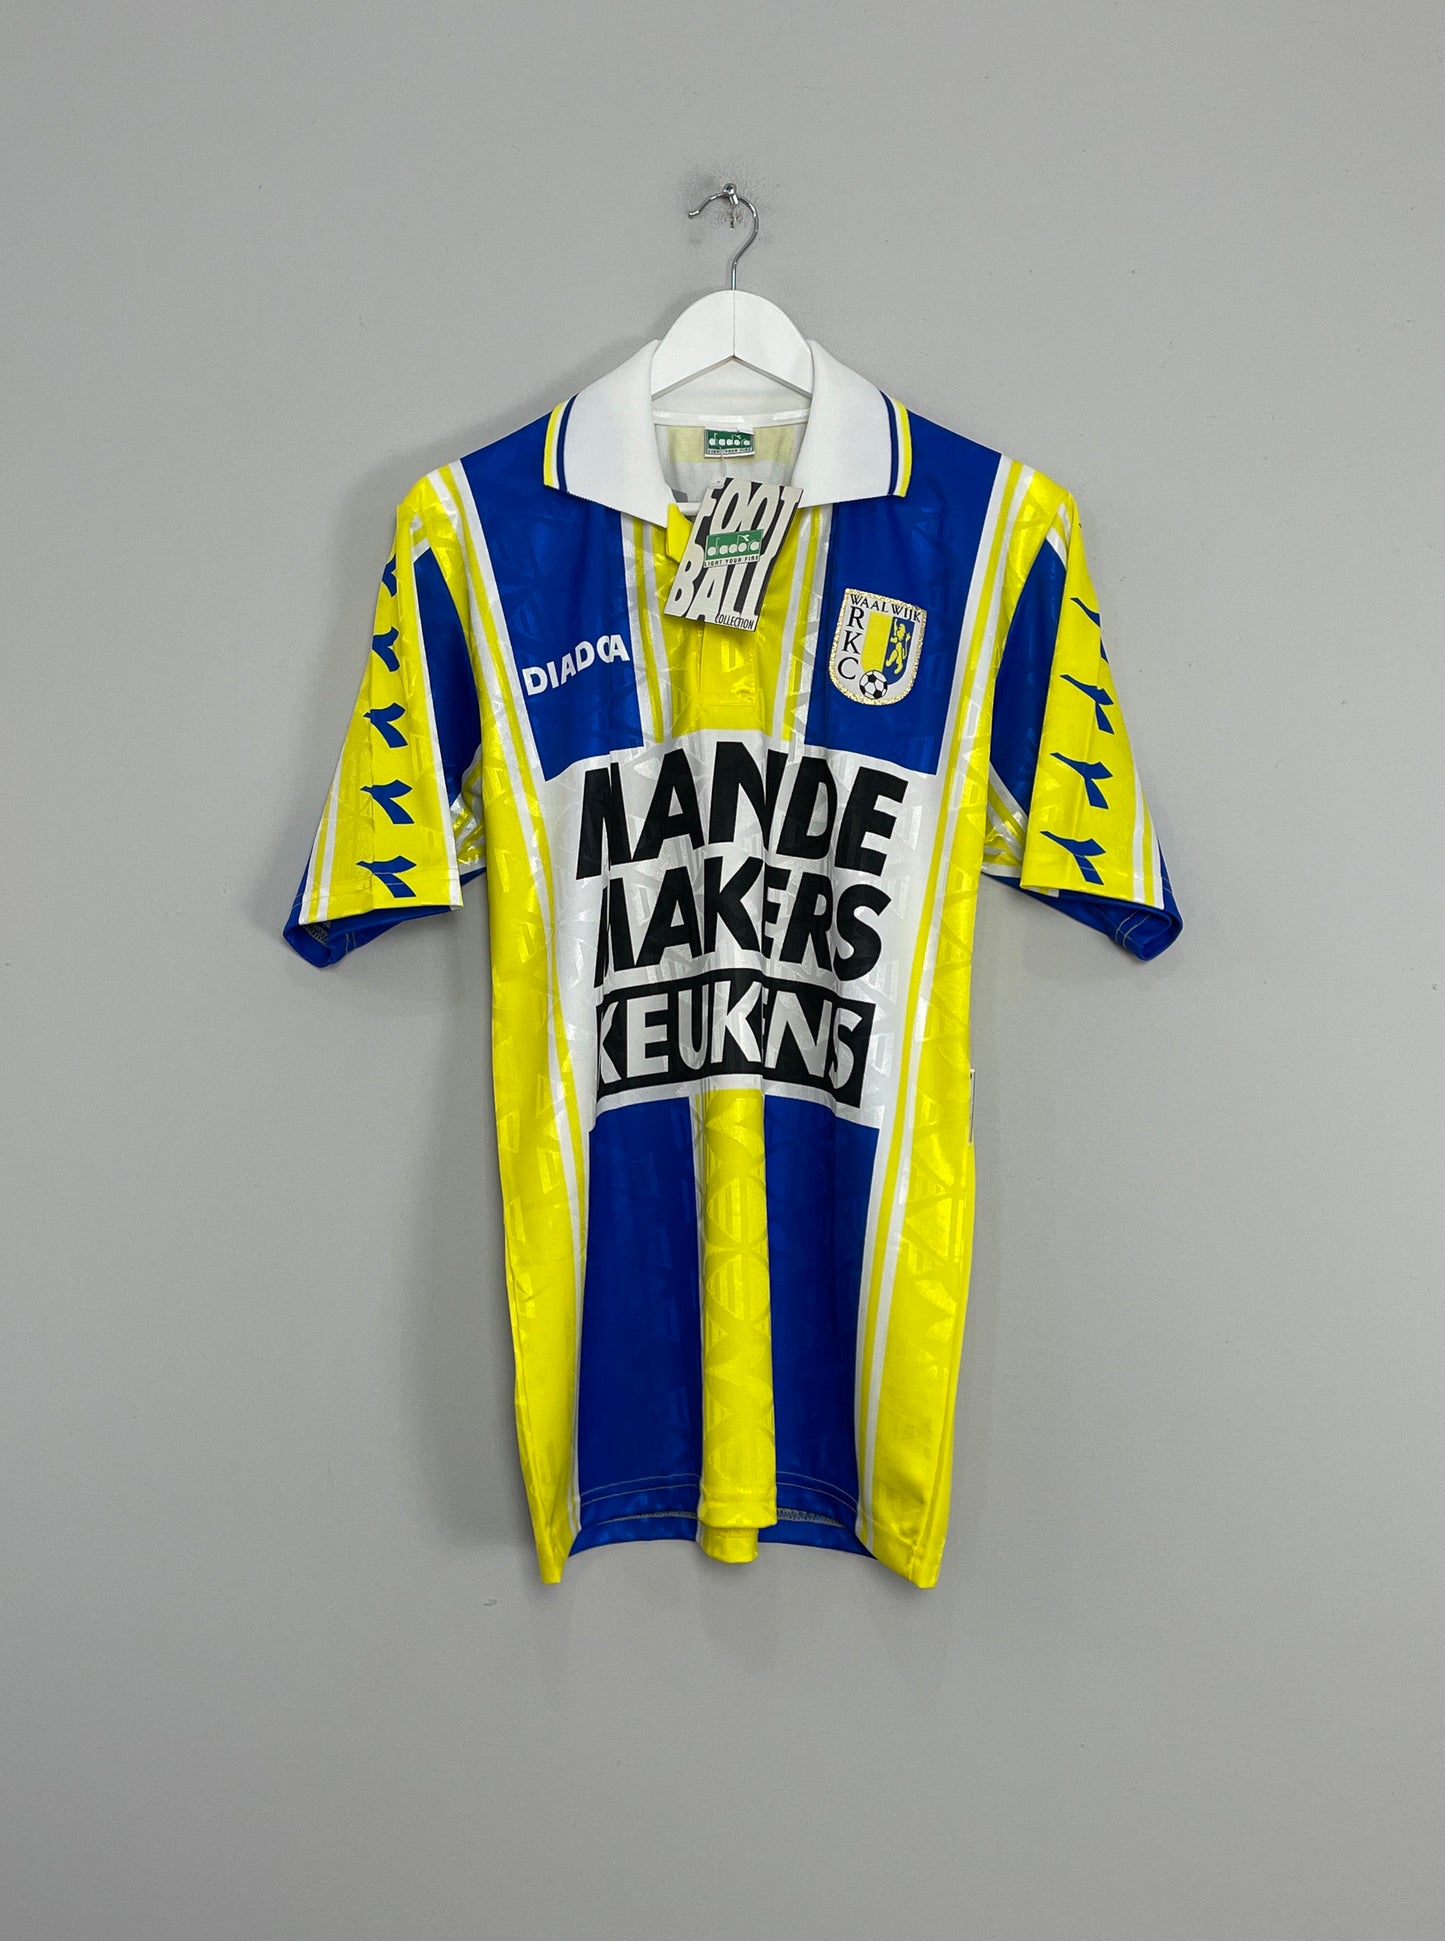 Image of the Waalwijk shirt from the 1995/97 season